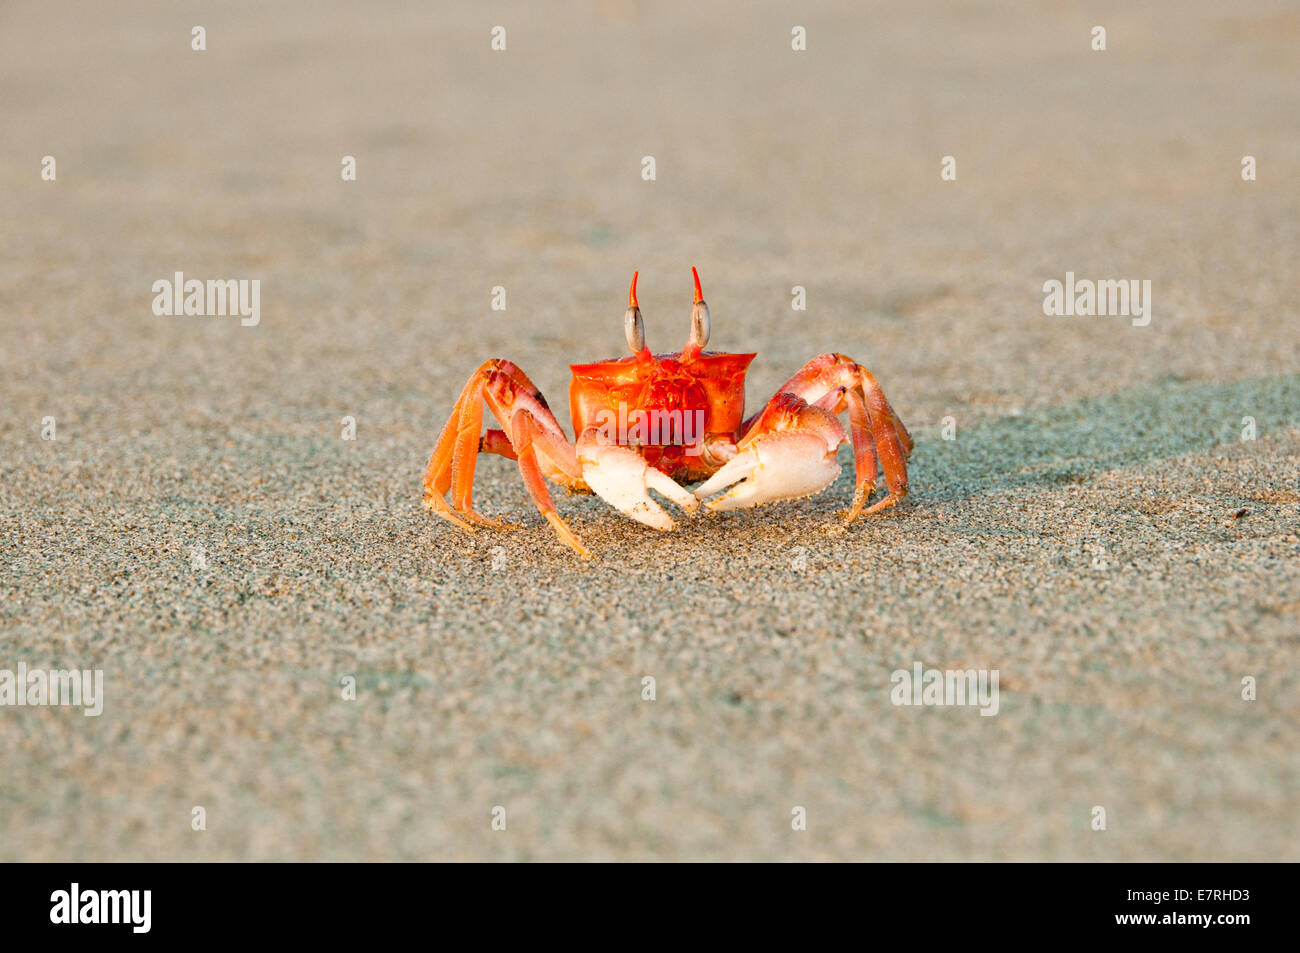 Frontal View of Alert Painted Ghost Crab (Ocypode gaudichaudii) Stock Photo